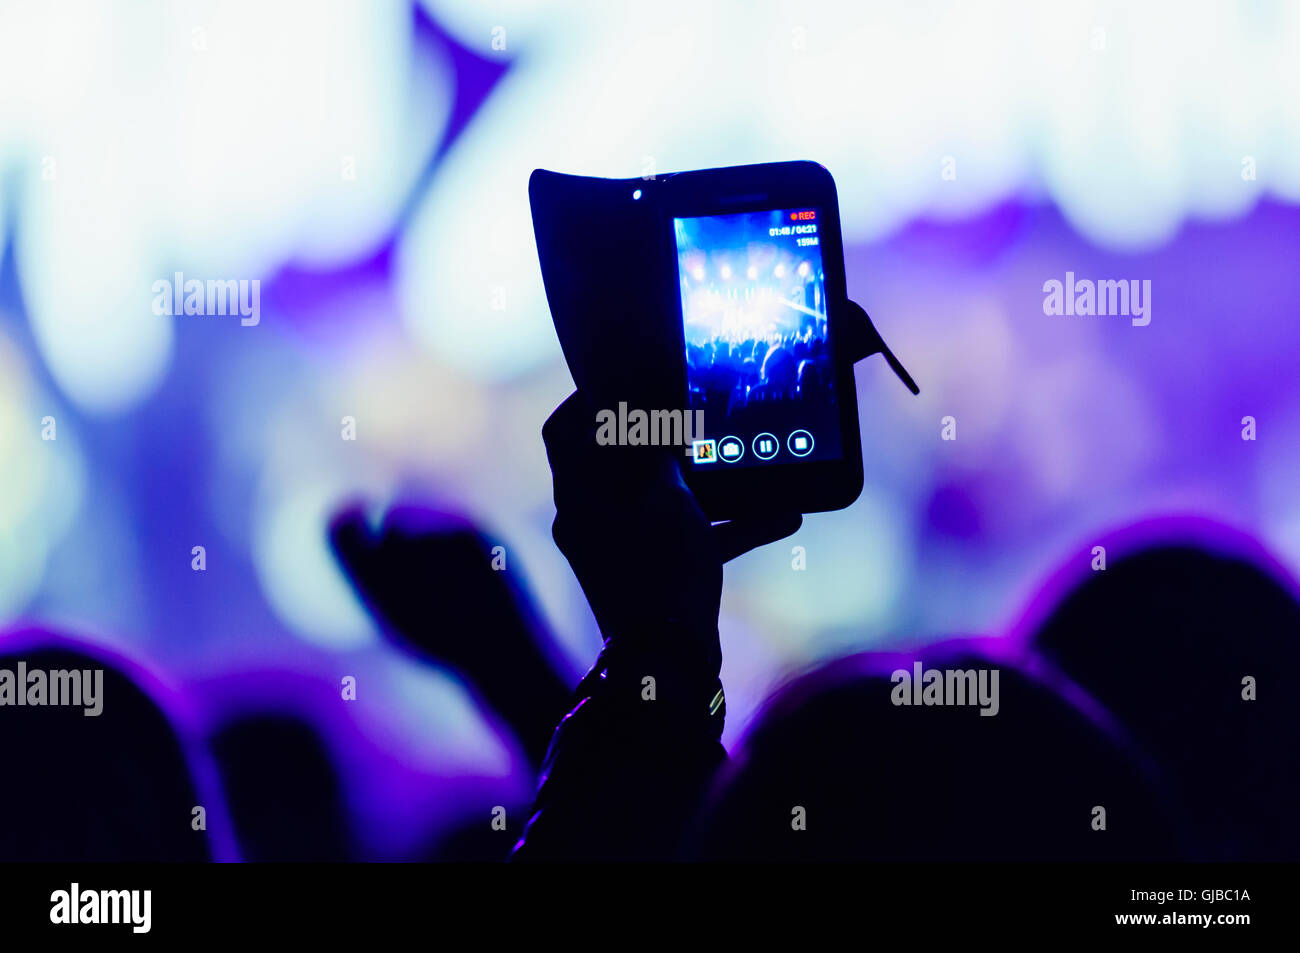 A member of the audience video records a performance at a music concert using their smartphones. Stock Photo